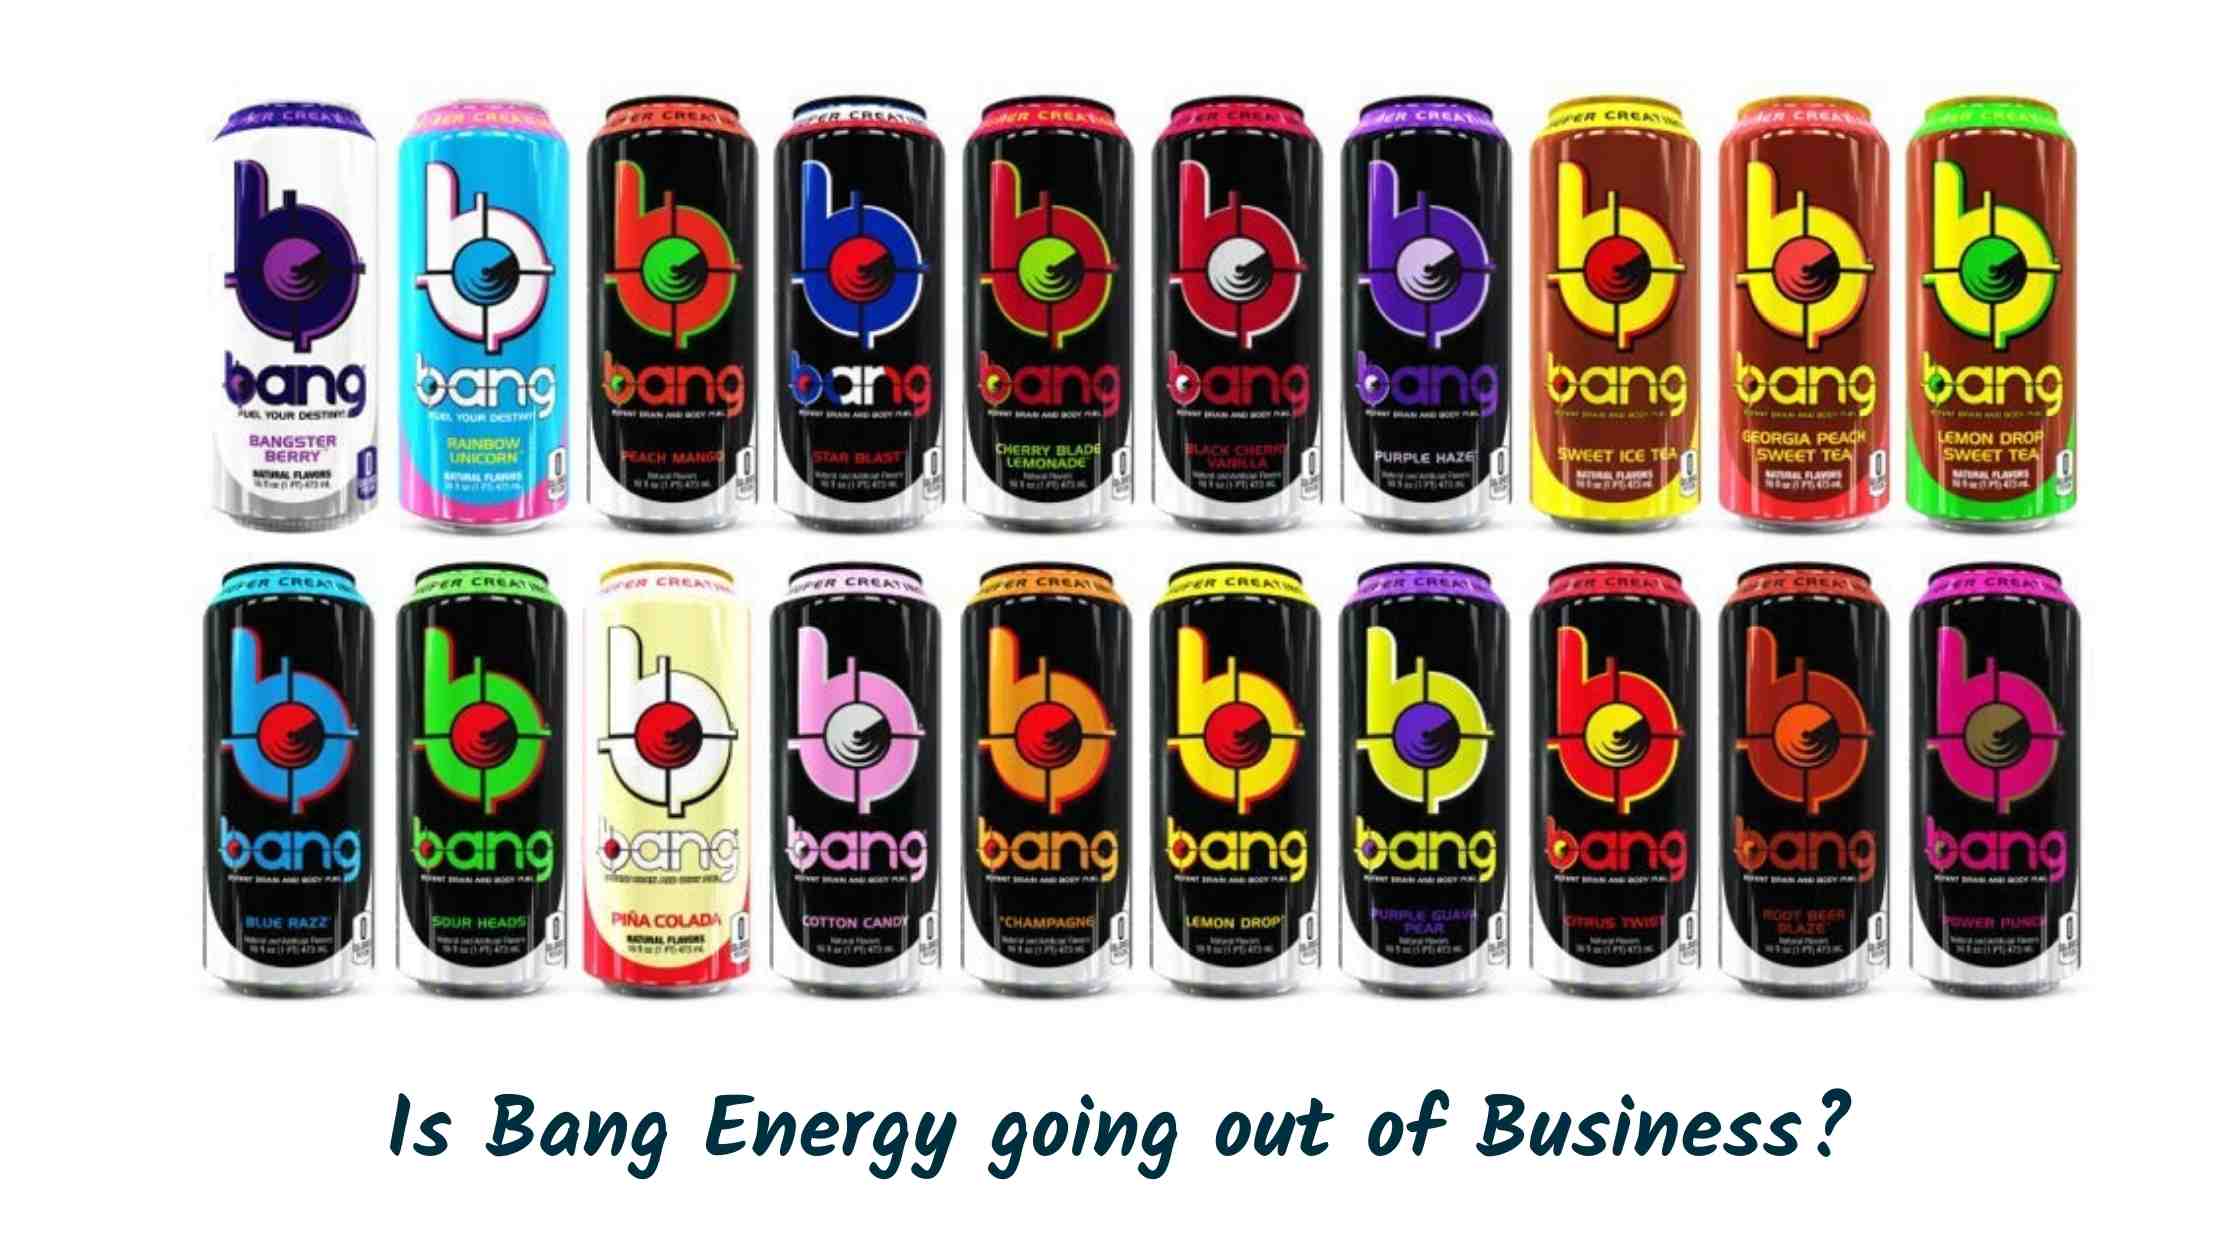 Is Bang Energy going out of Business?